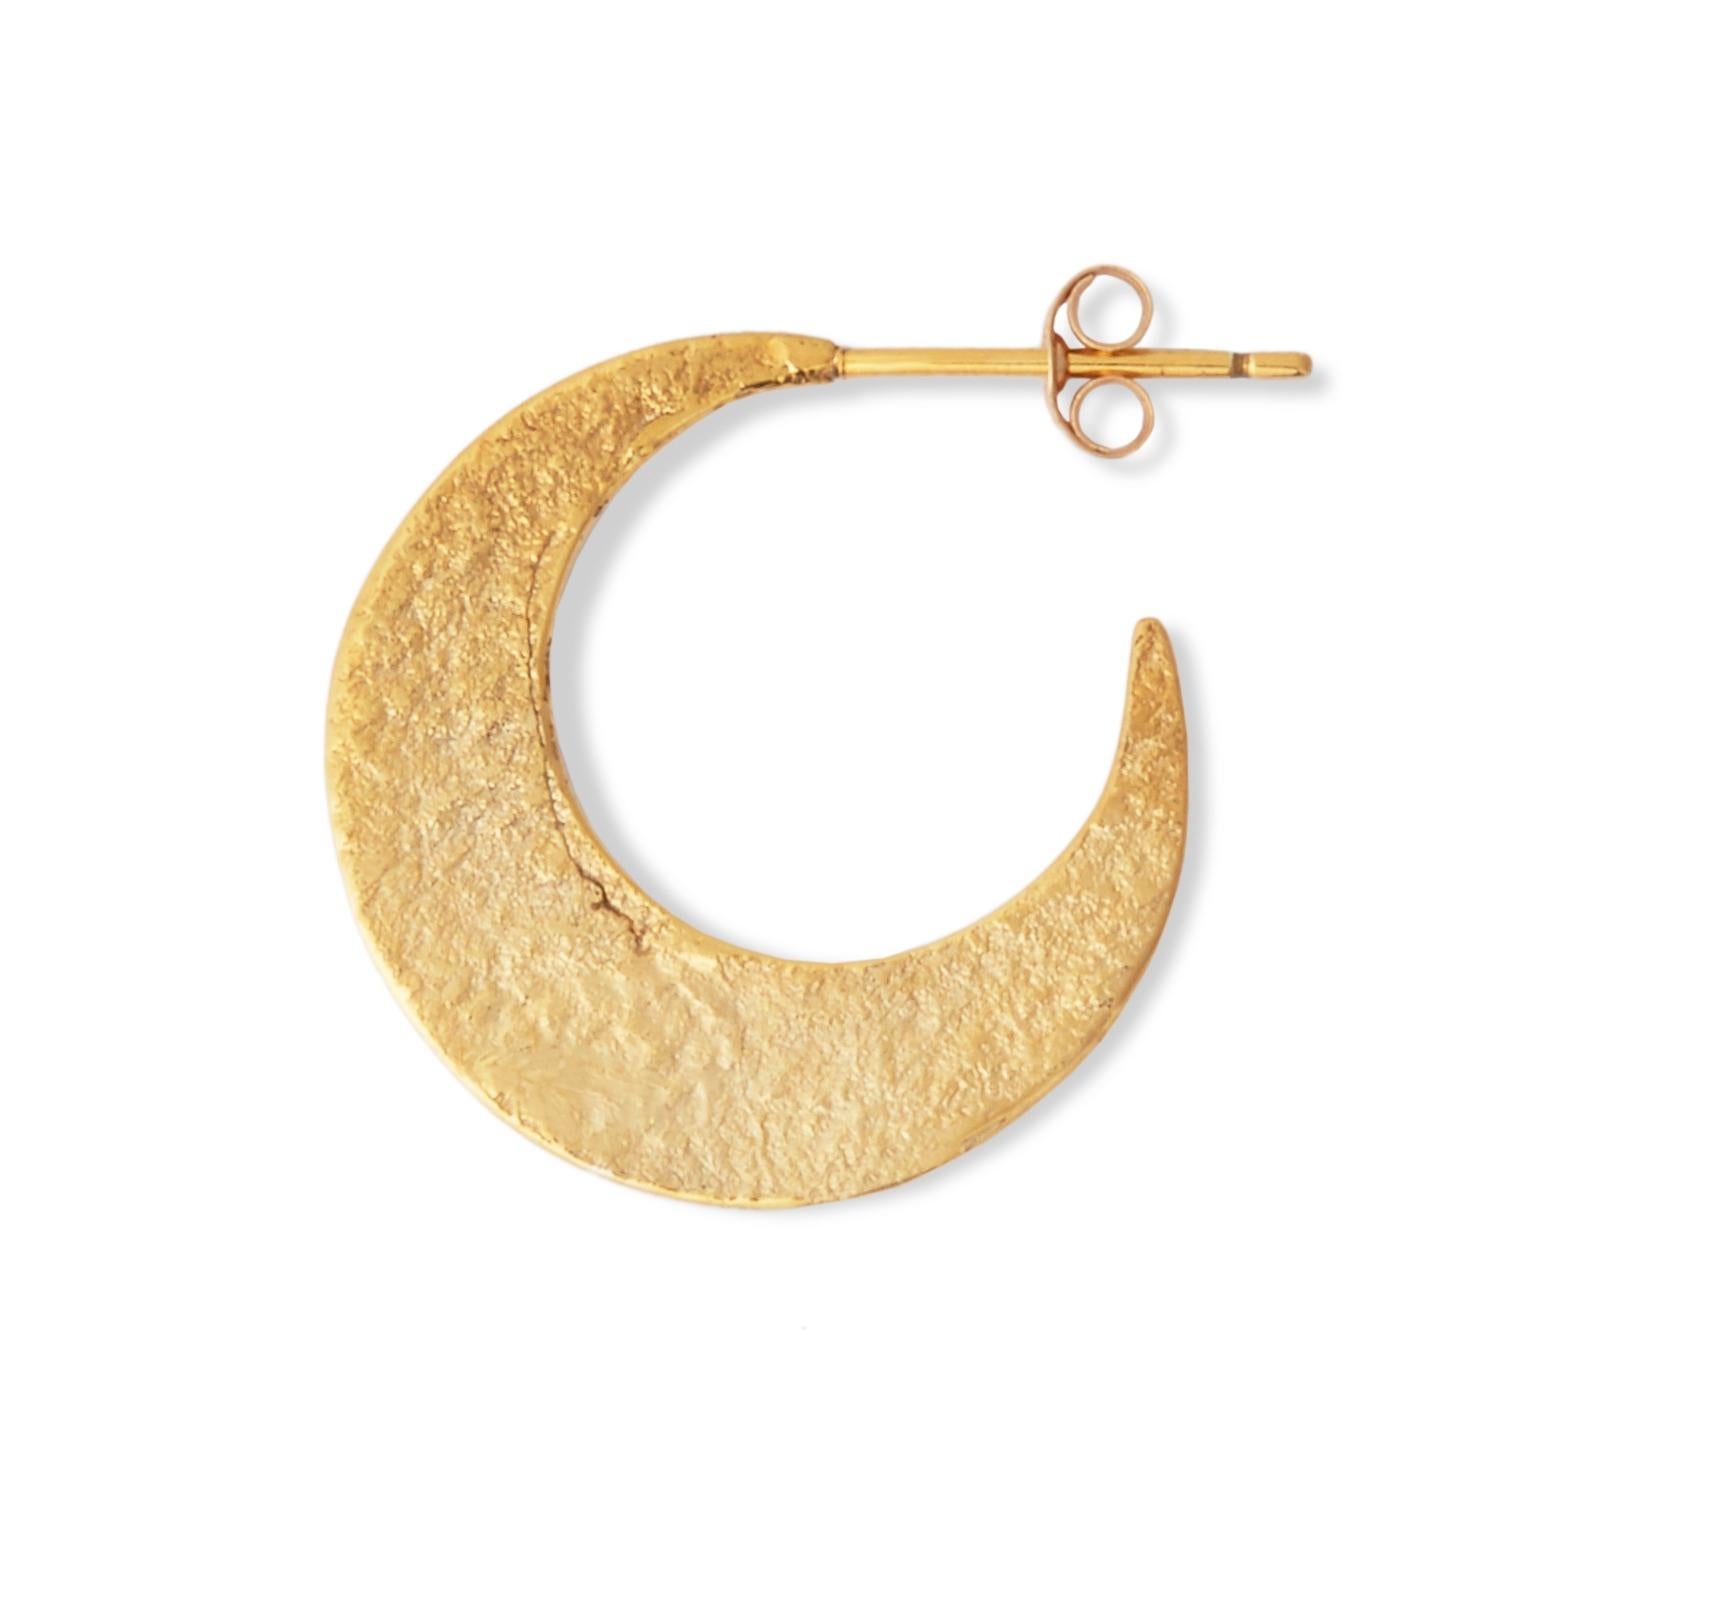 These textured crescent-shaped hoop earrings by Allison Bryan are handcrafted in 18-carat gold plated sterling silver with a post and butterfly closure.  They feature a shimmering texture on one side and a rustic high-polish finish on the other so